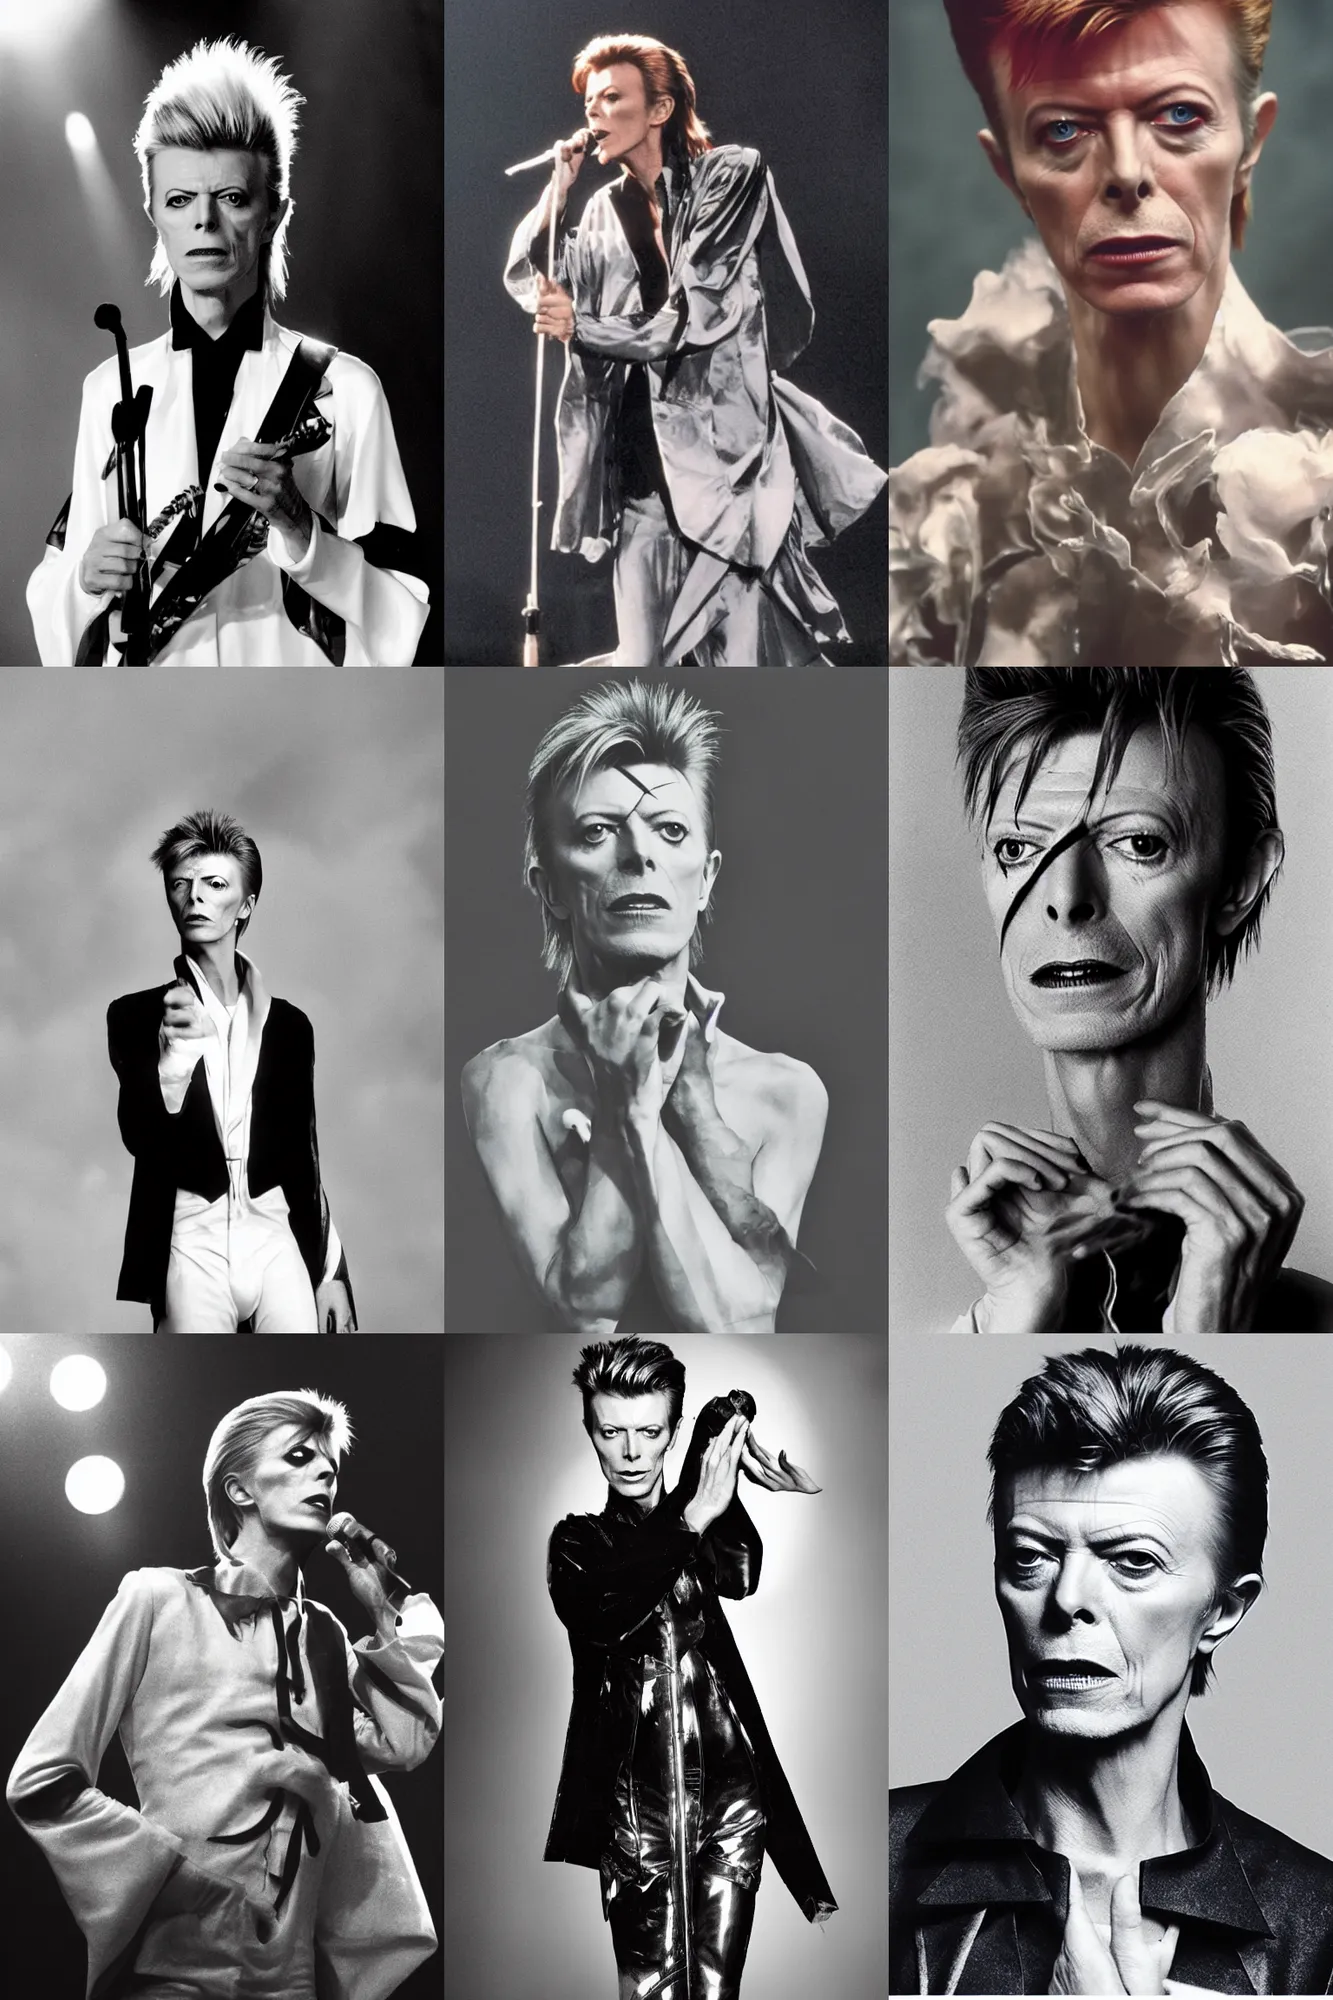 Prompt: David Bowie as Dream of the Endless